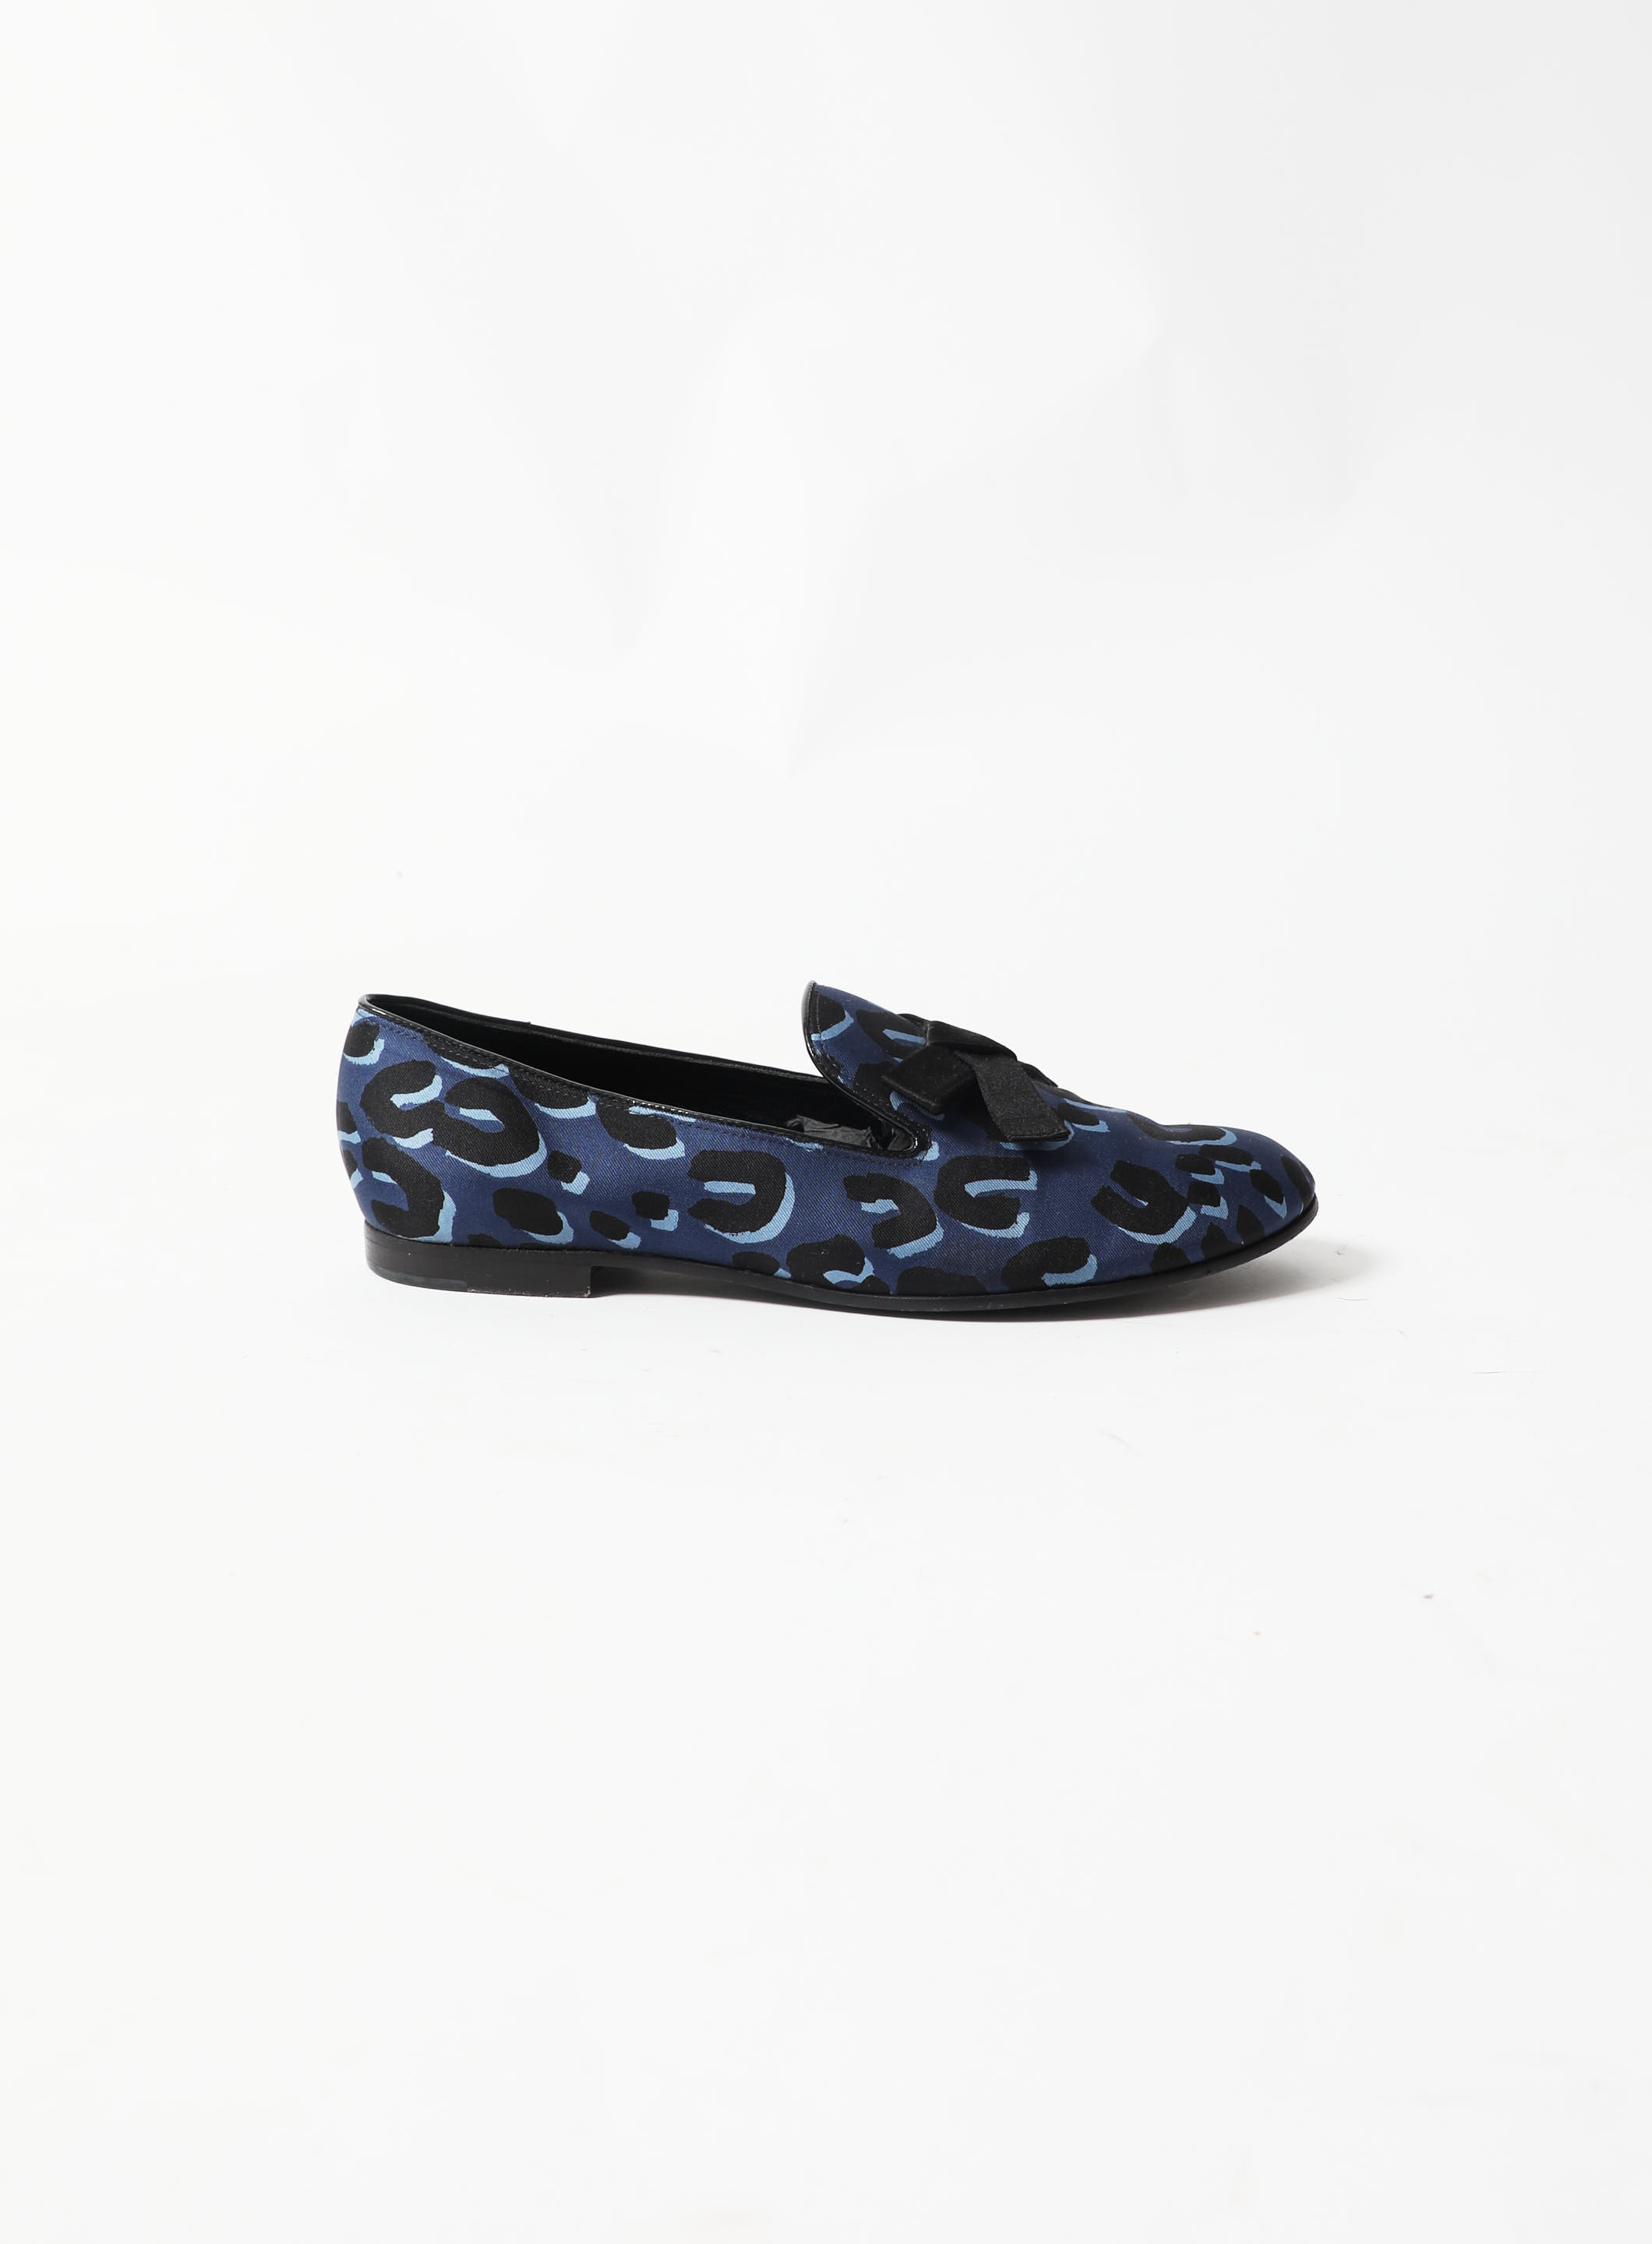 2001 x Stephen Sprouse Silk Loafers | Authentic & Vintage |